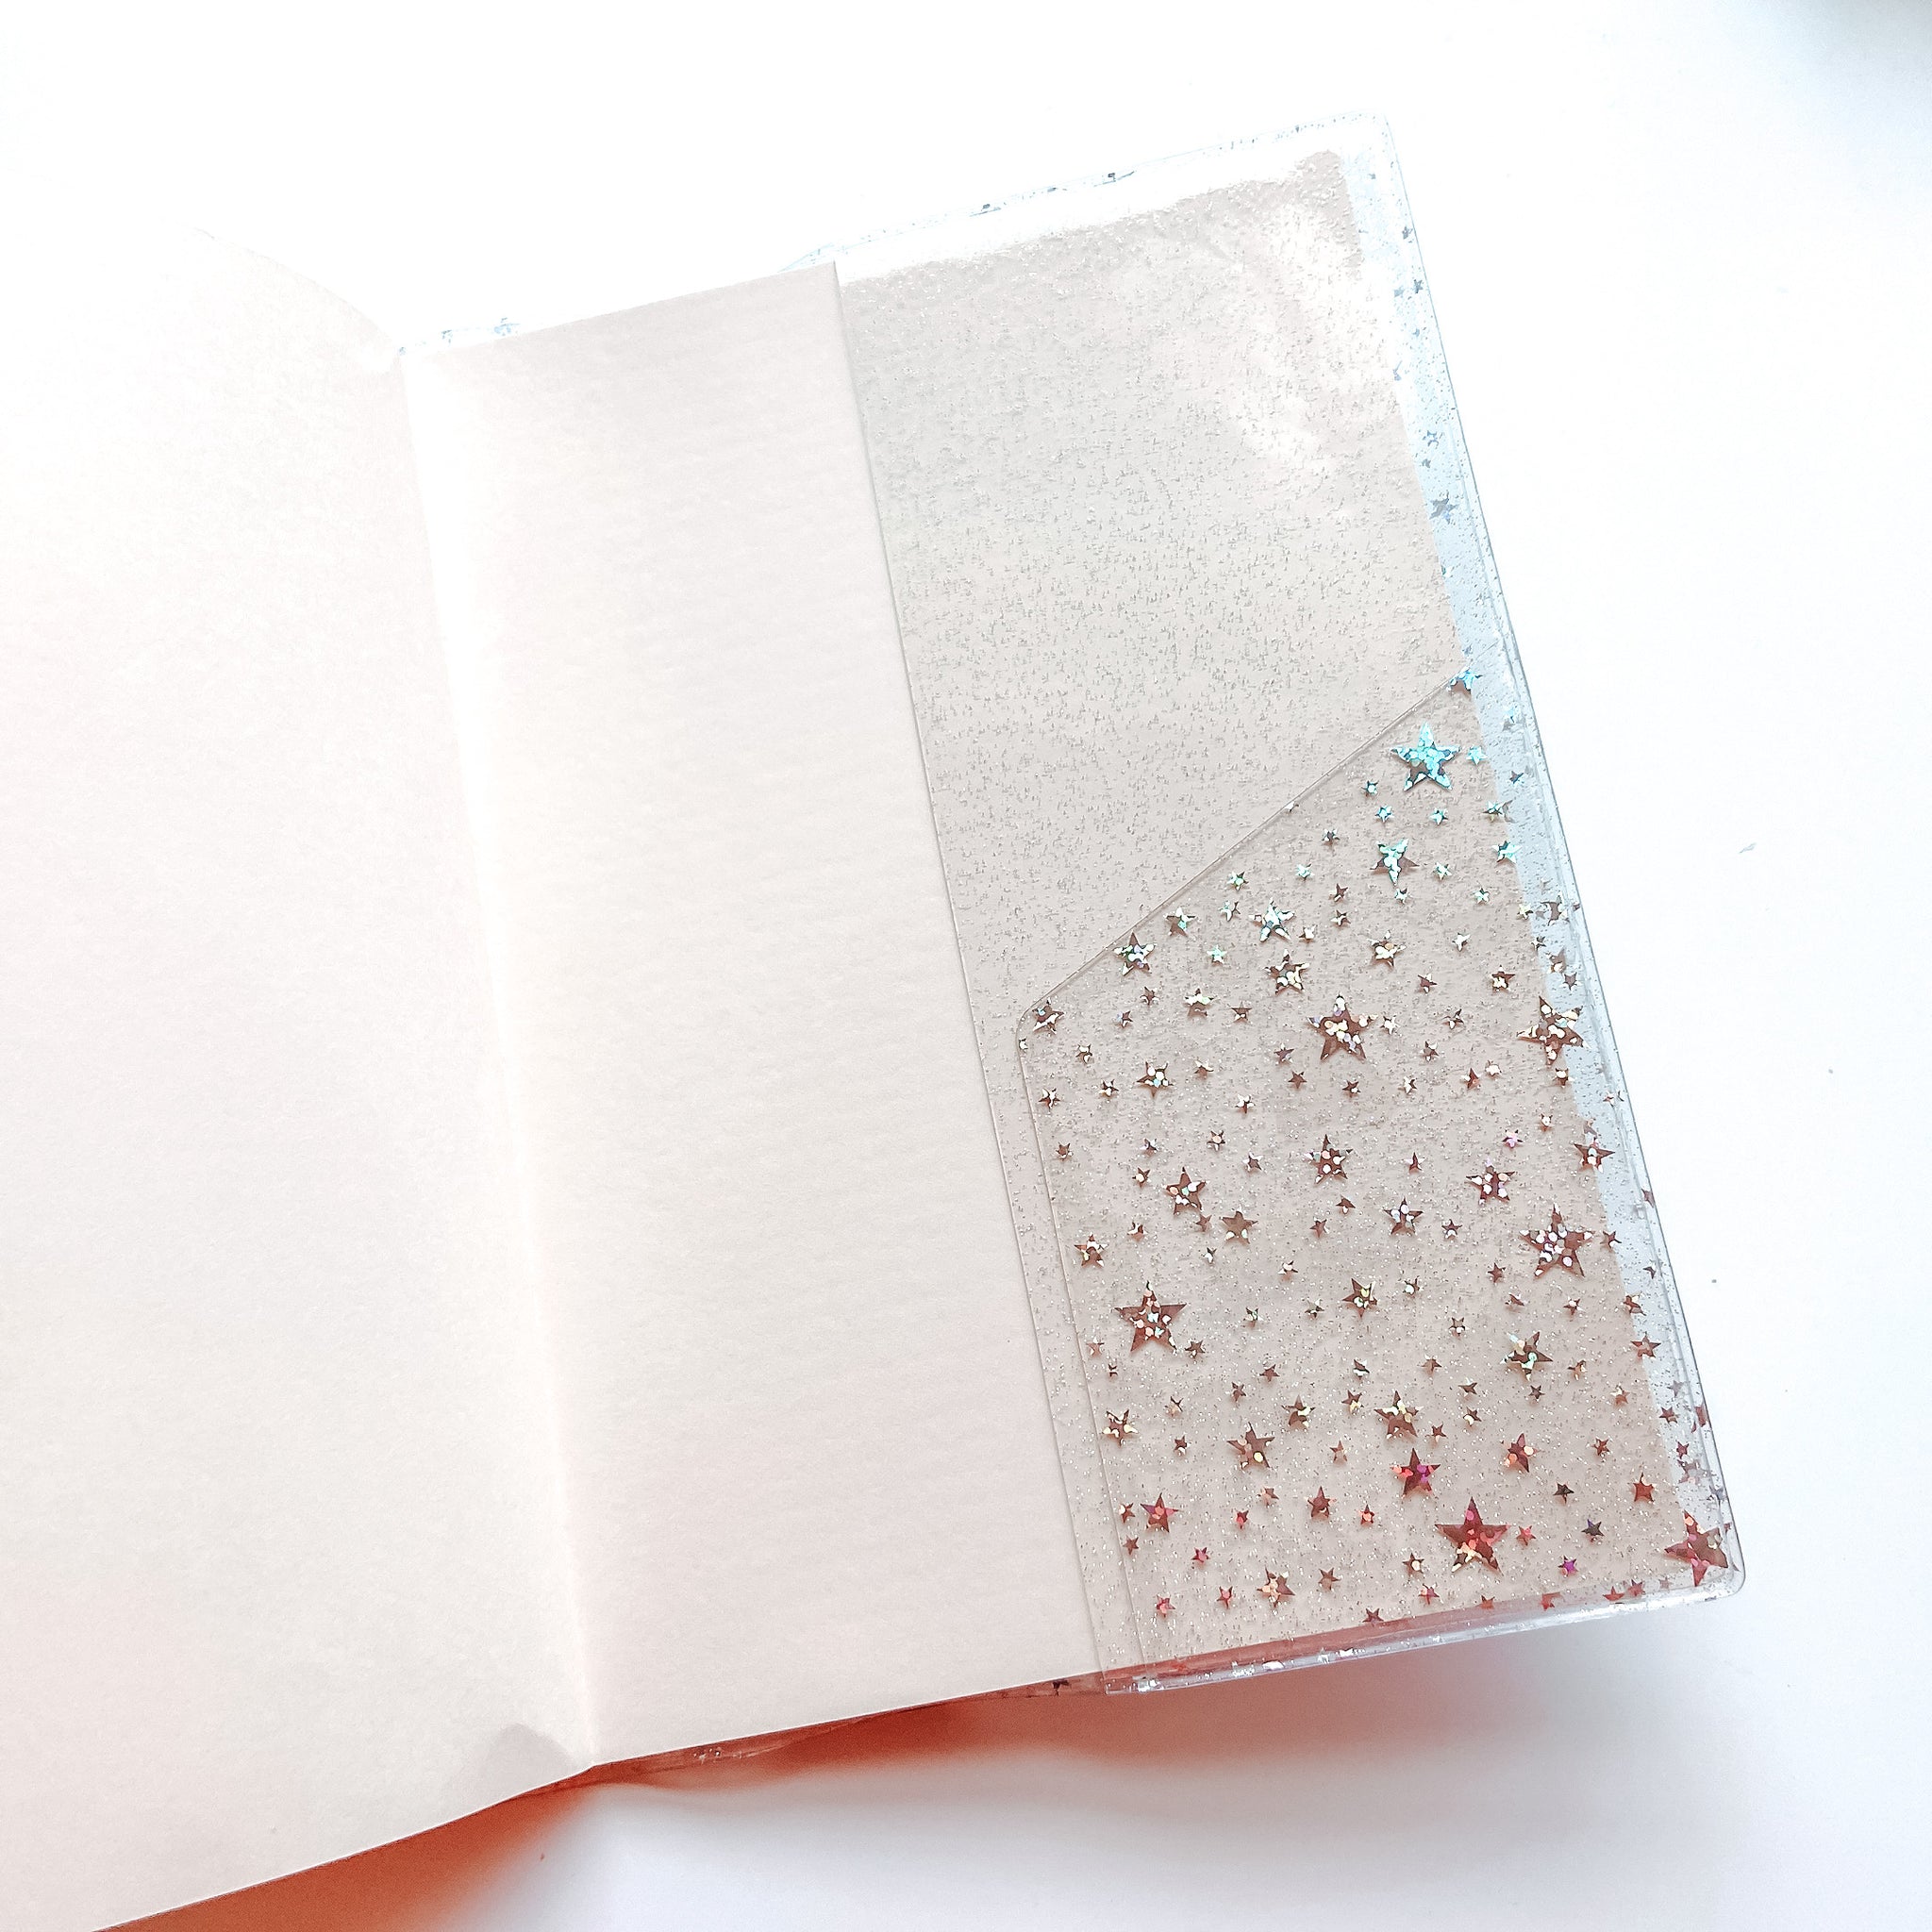 Hobonichi Techo Cousin A5 Glitter Leather Cover and Planner, Brand New